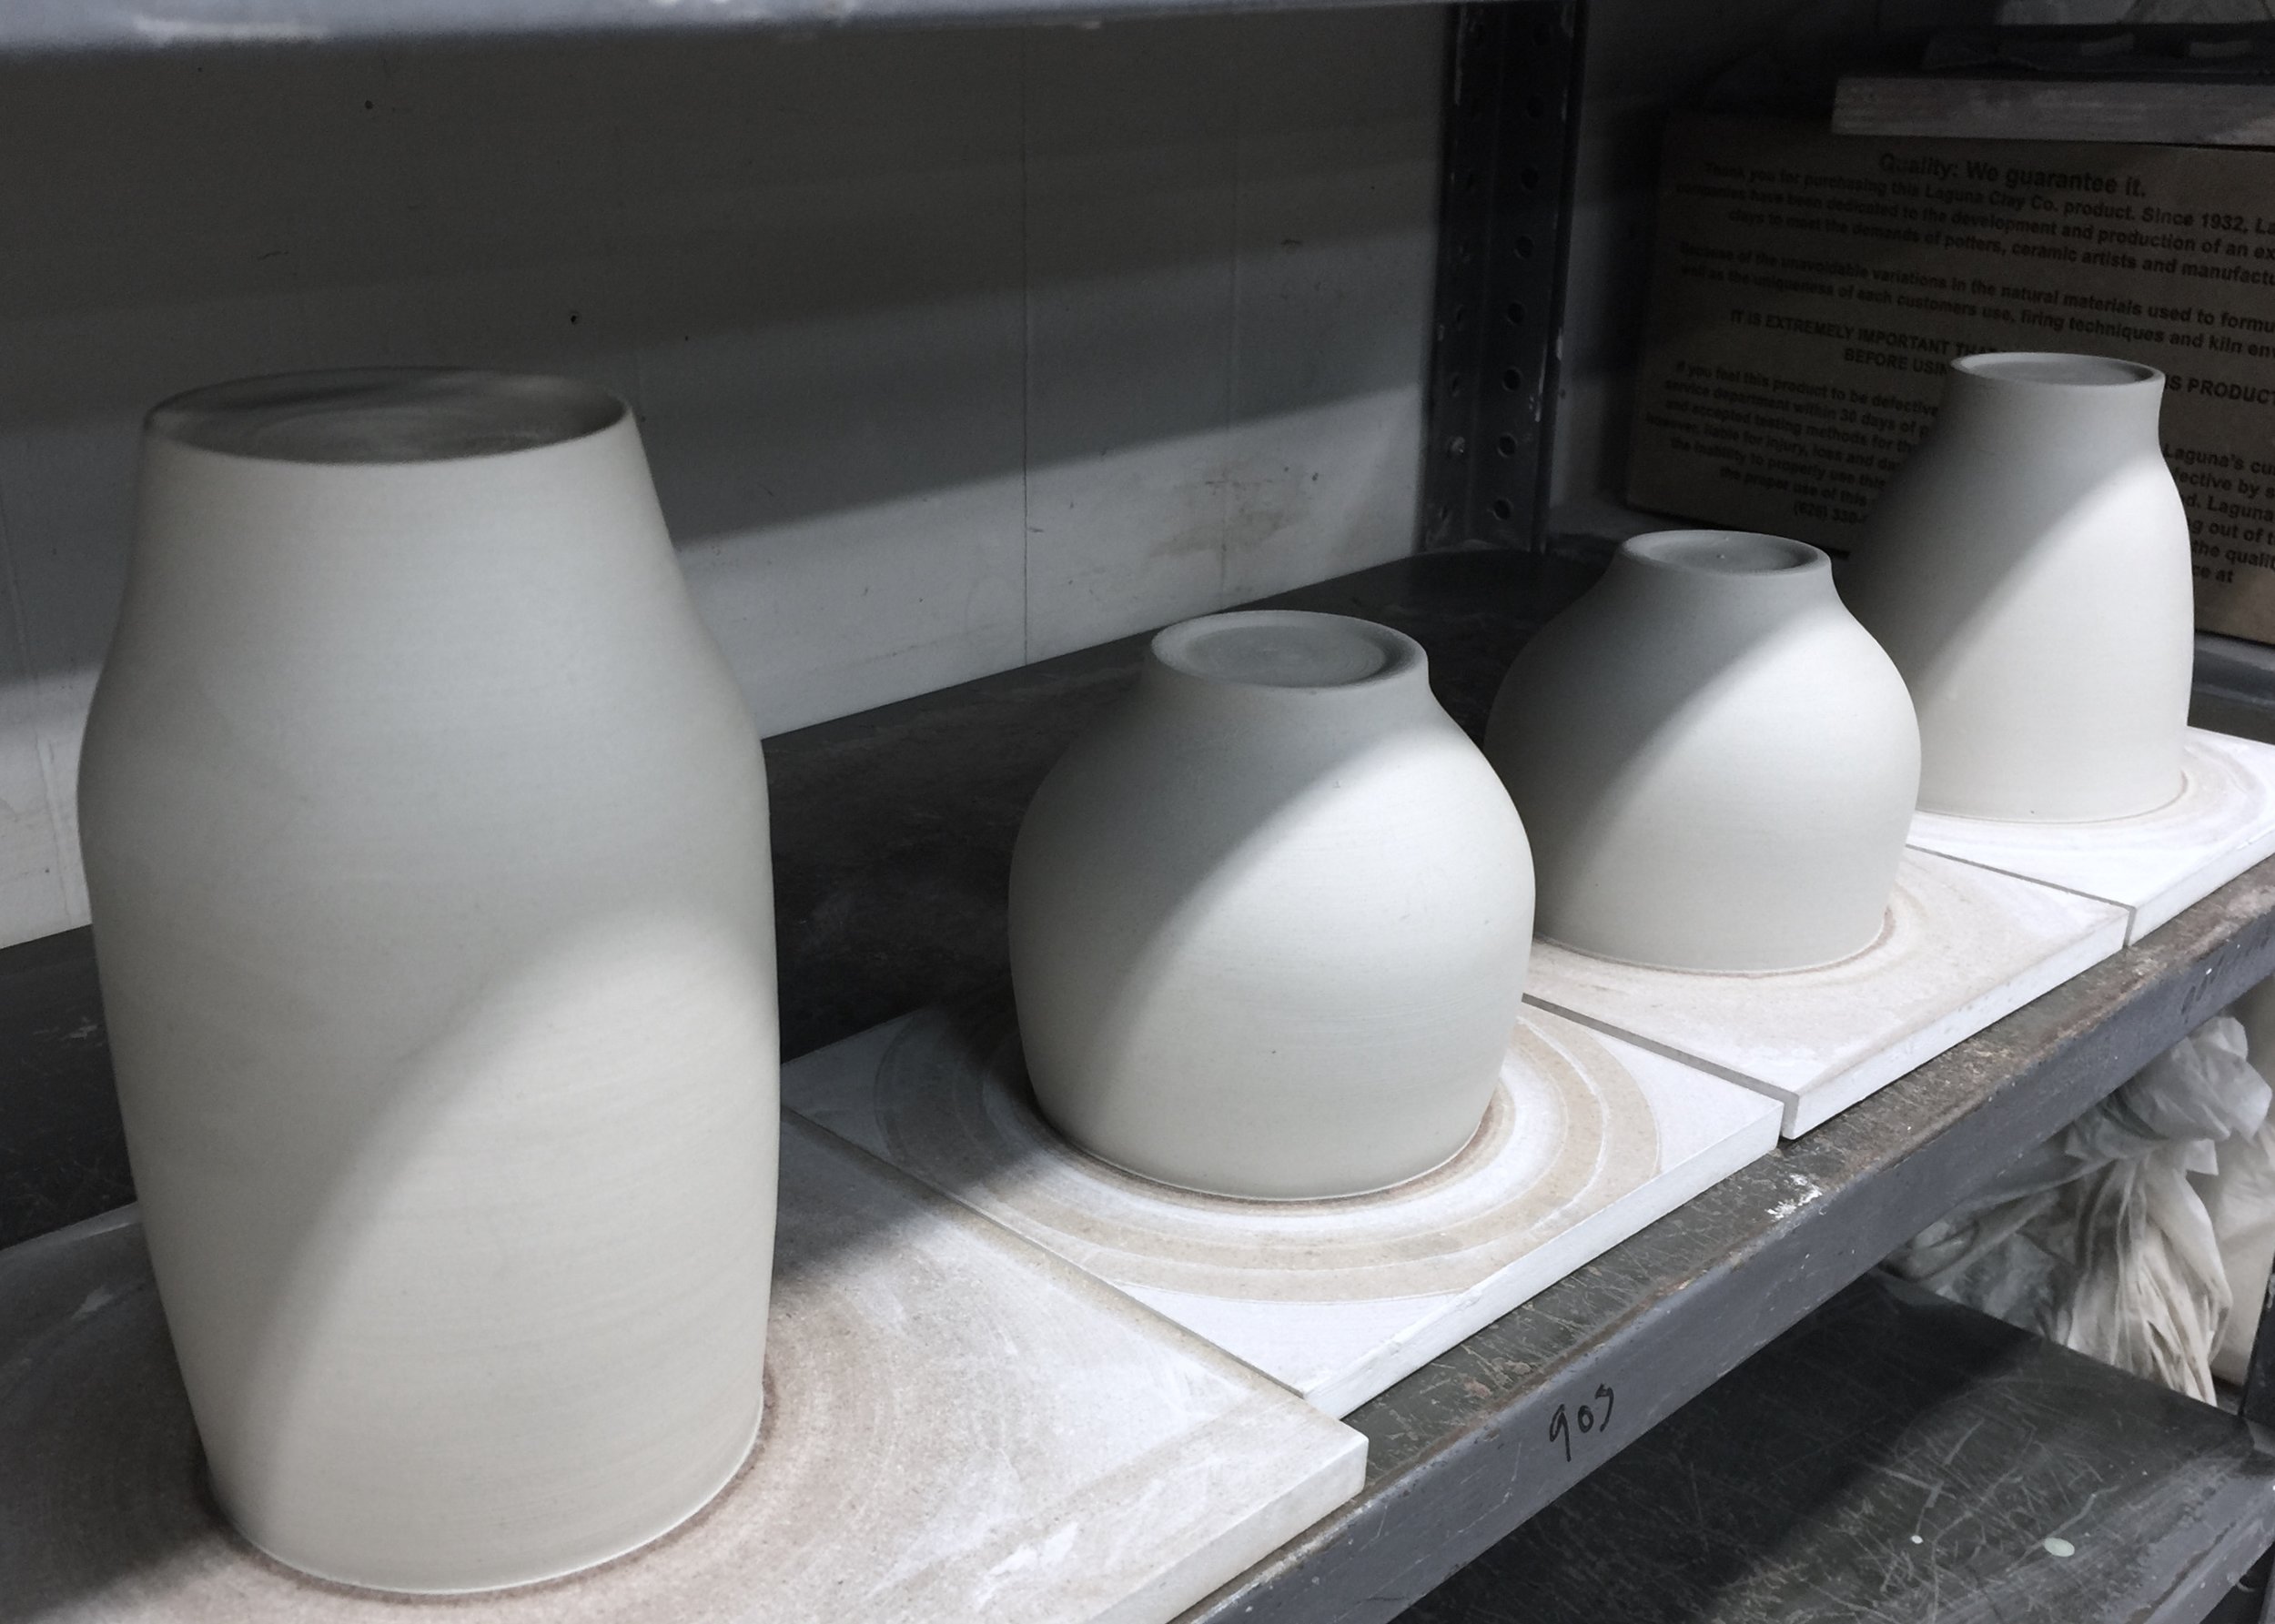 Ceramic Molds - An Introduction to Ceramic Mold Making and Slip Casting